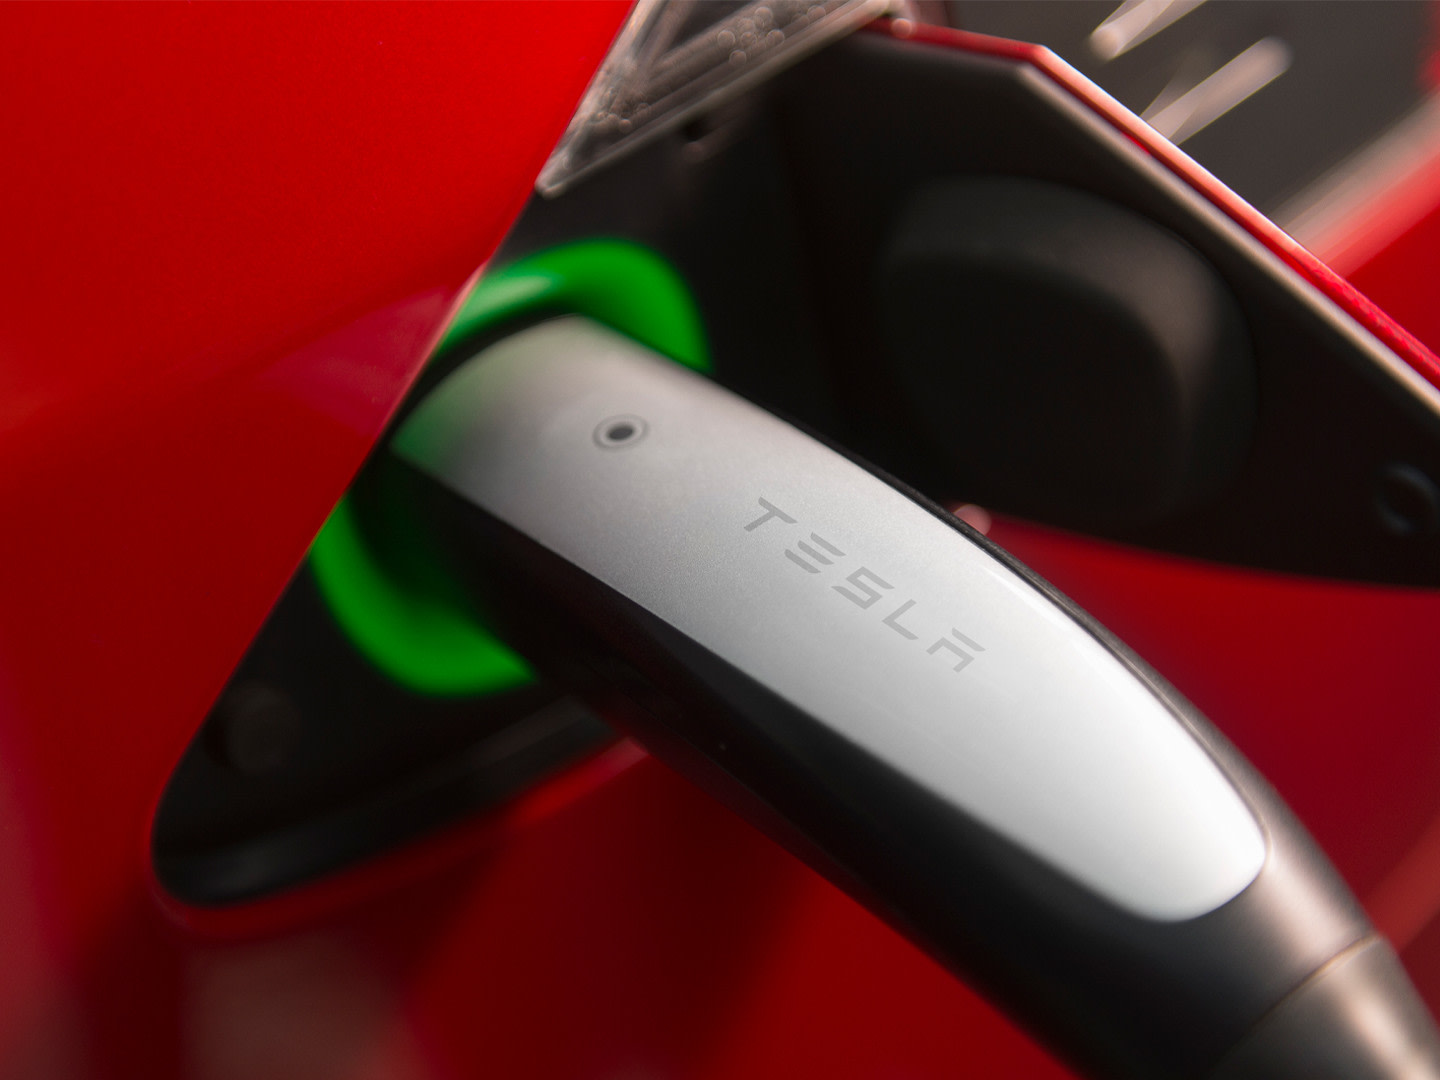 Supercharger plugged into a Tesla charge port